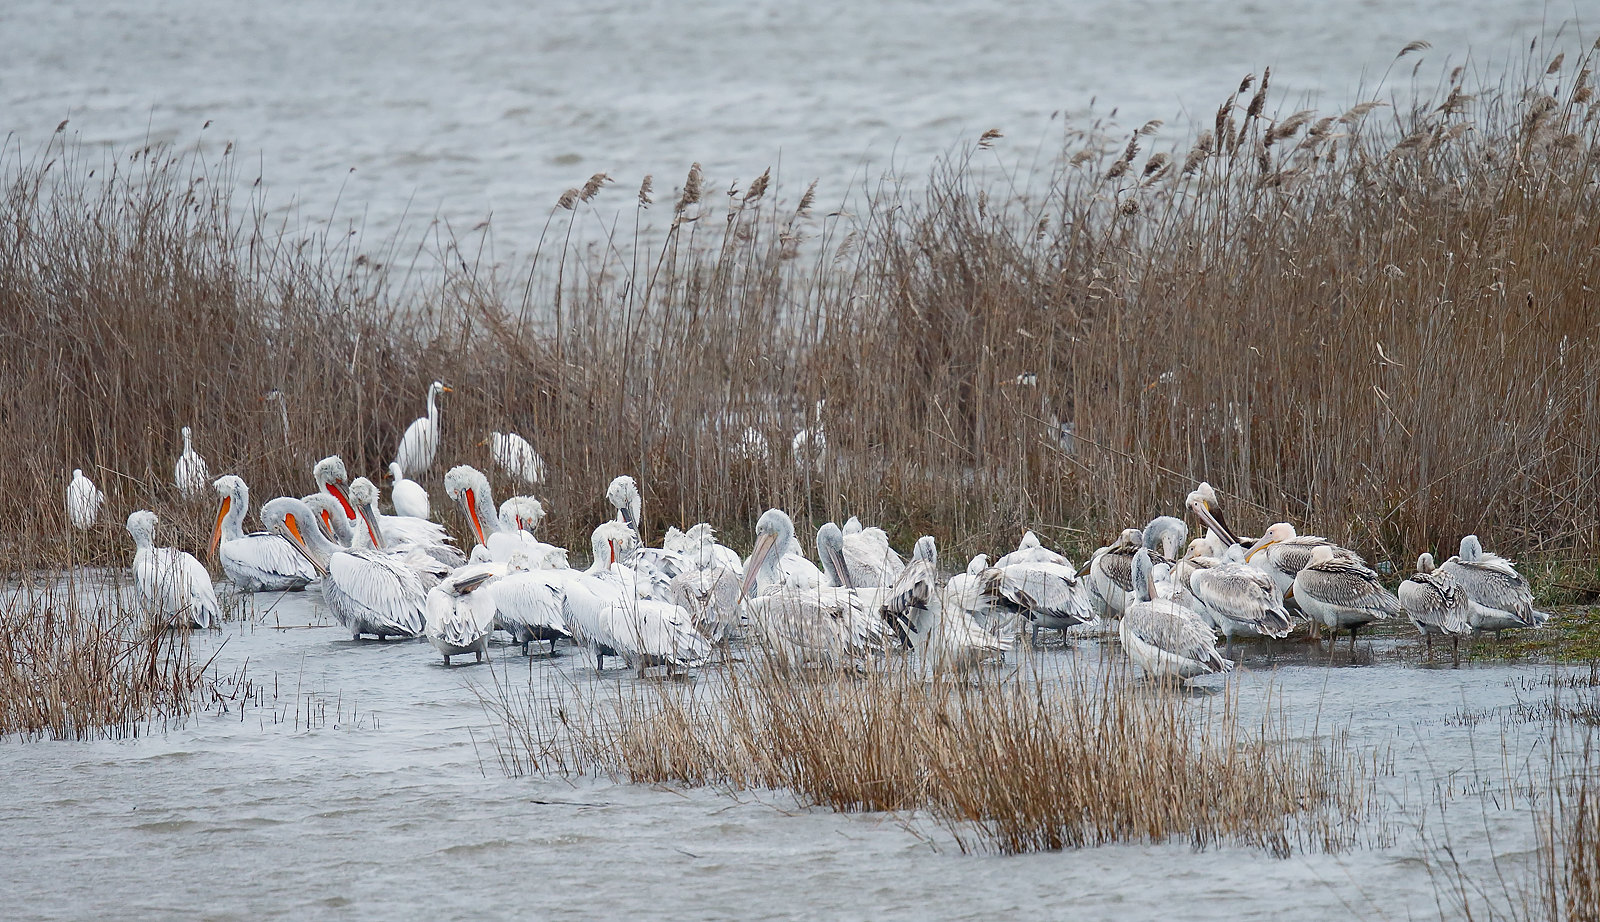 Dalmation & Great White Pelicans